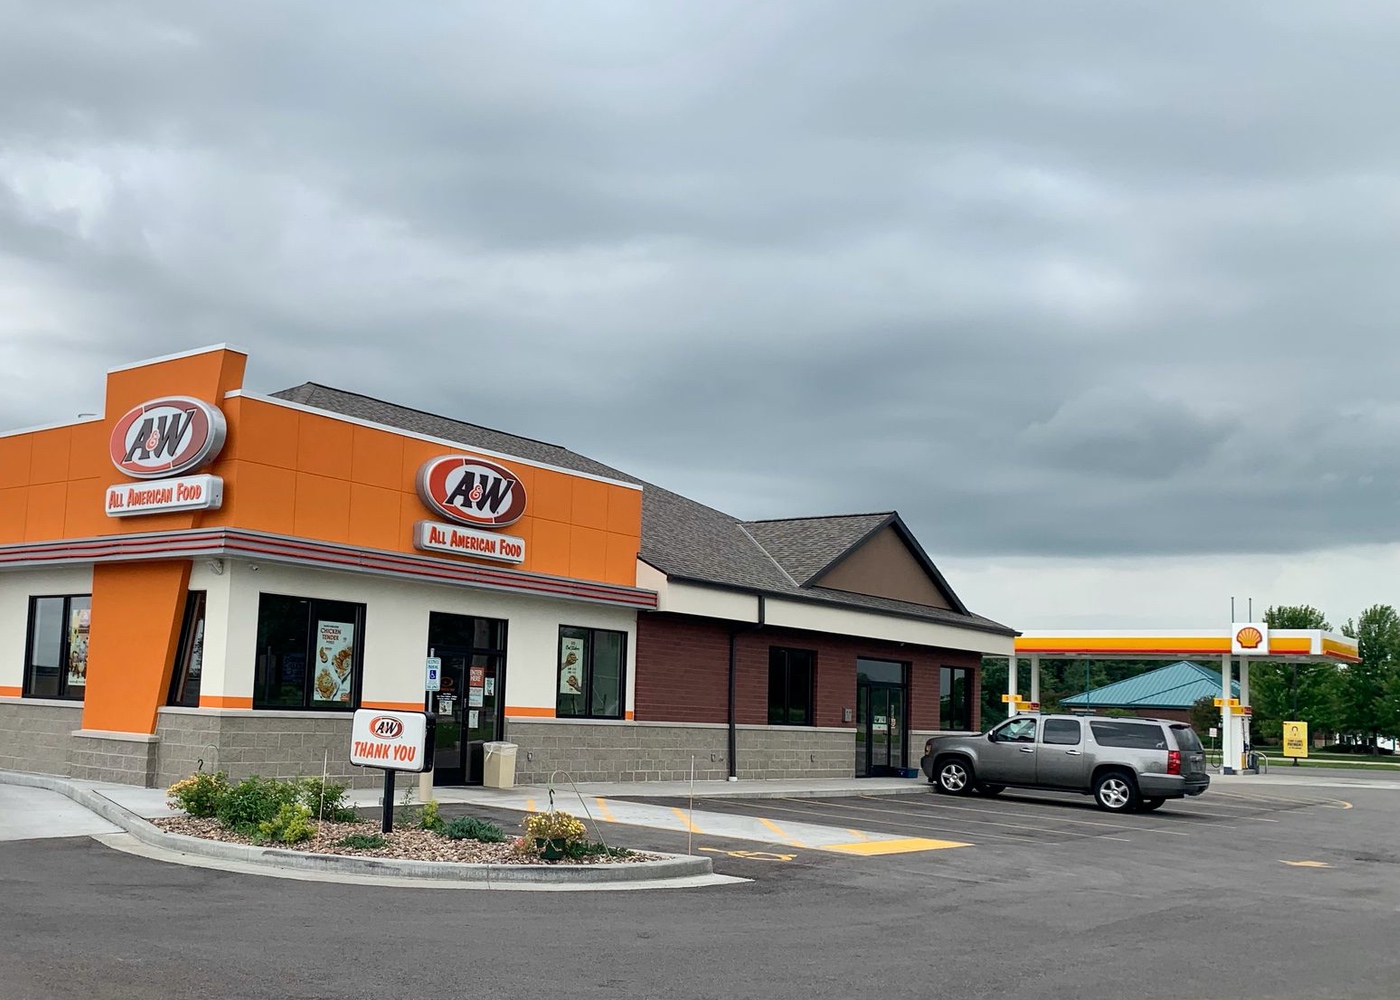 Exterior of A&W Restaurant in Winneconne, Wisconsin connected to a Shell gas station.